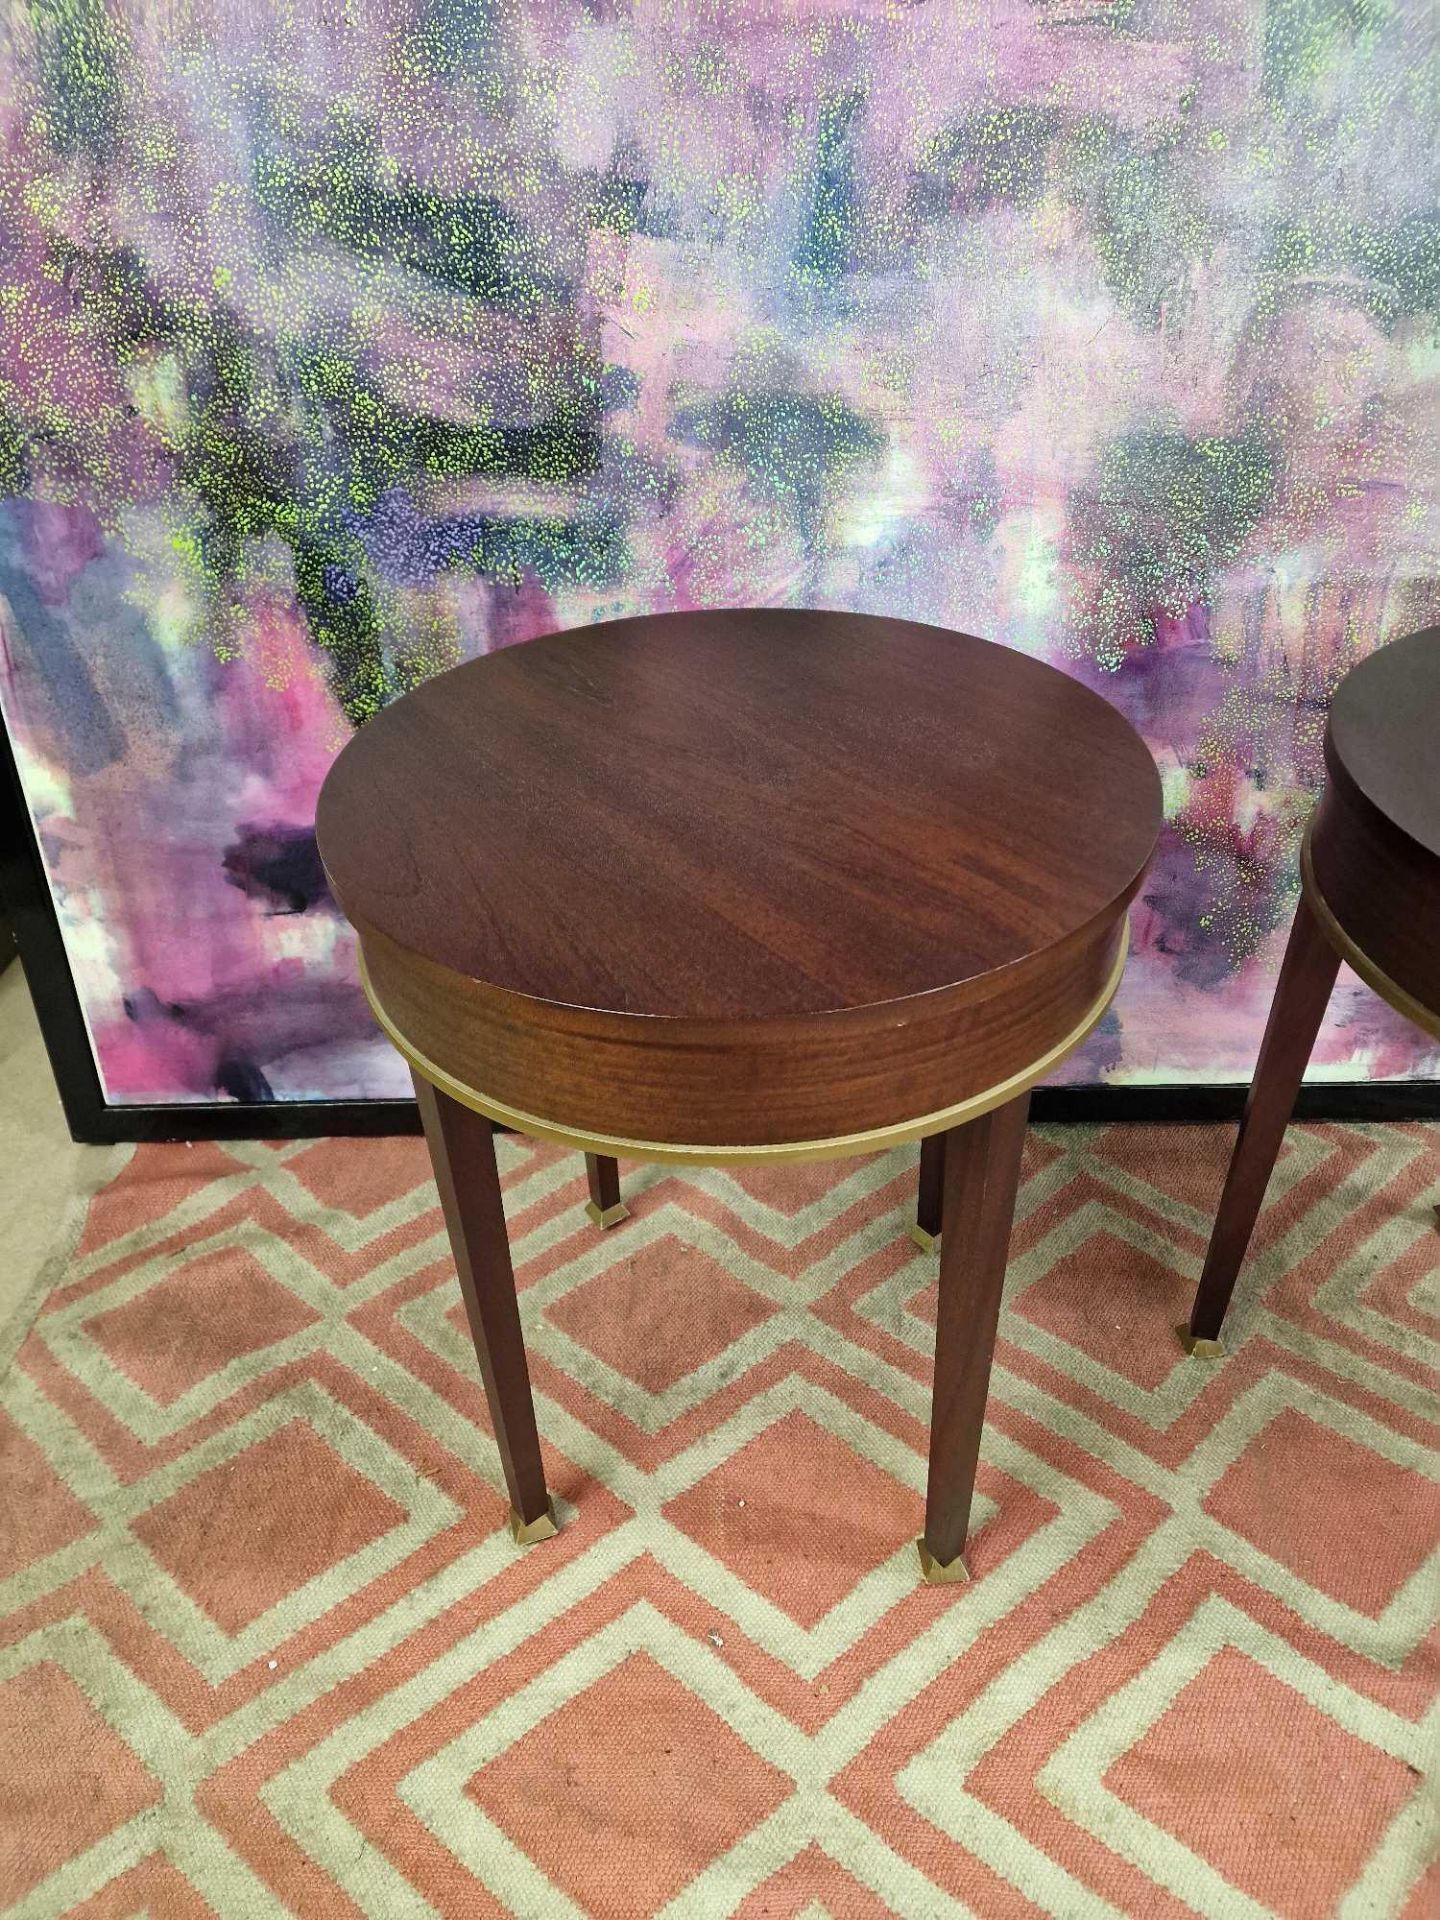 A Pair Of Mahogany Drum Side Tables With Circular Tops 55cm In Diameter With Brass Trim Details On - Image 2 of 3